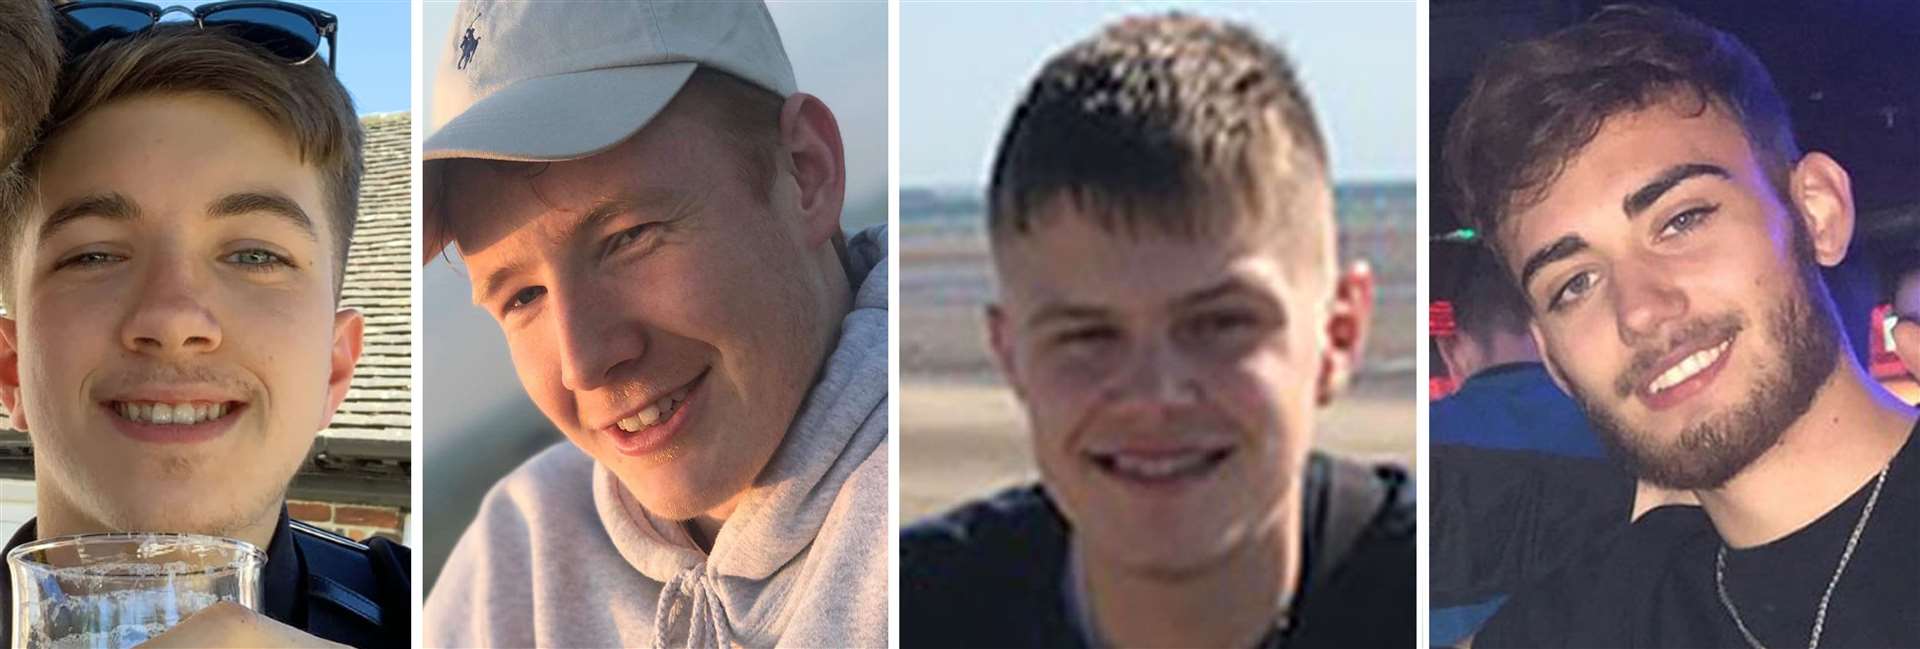 (left to right) Ryan Nelson, Jordan Rawlings, Matthew Parke and Corey Owen were all killed in the tragedy (Wiltshire Police/PA)